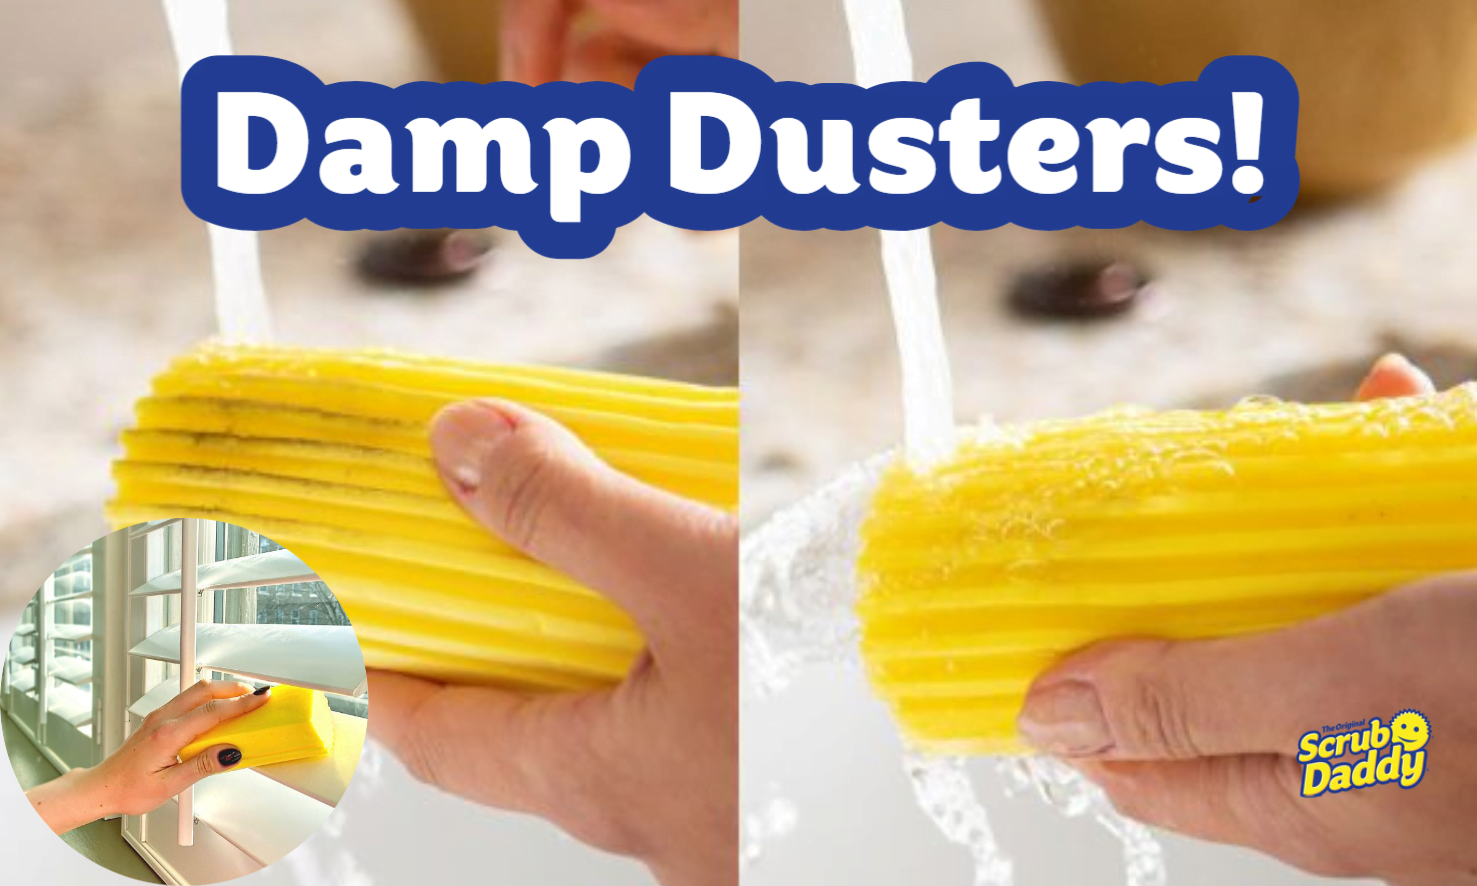 Scrub Daddy Damp Duster, Magical Dust Cleaning Sponge, Dusters for